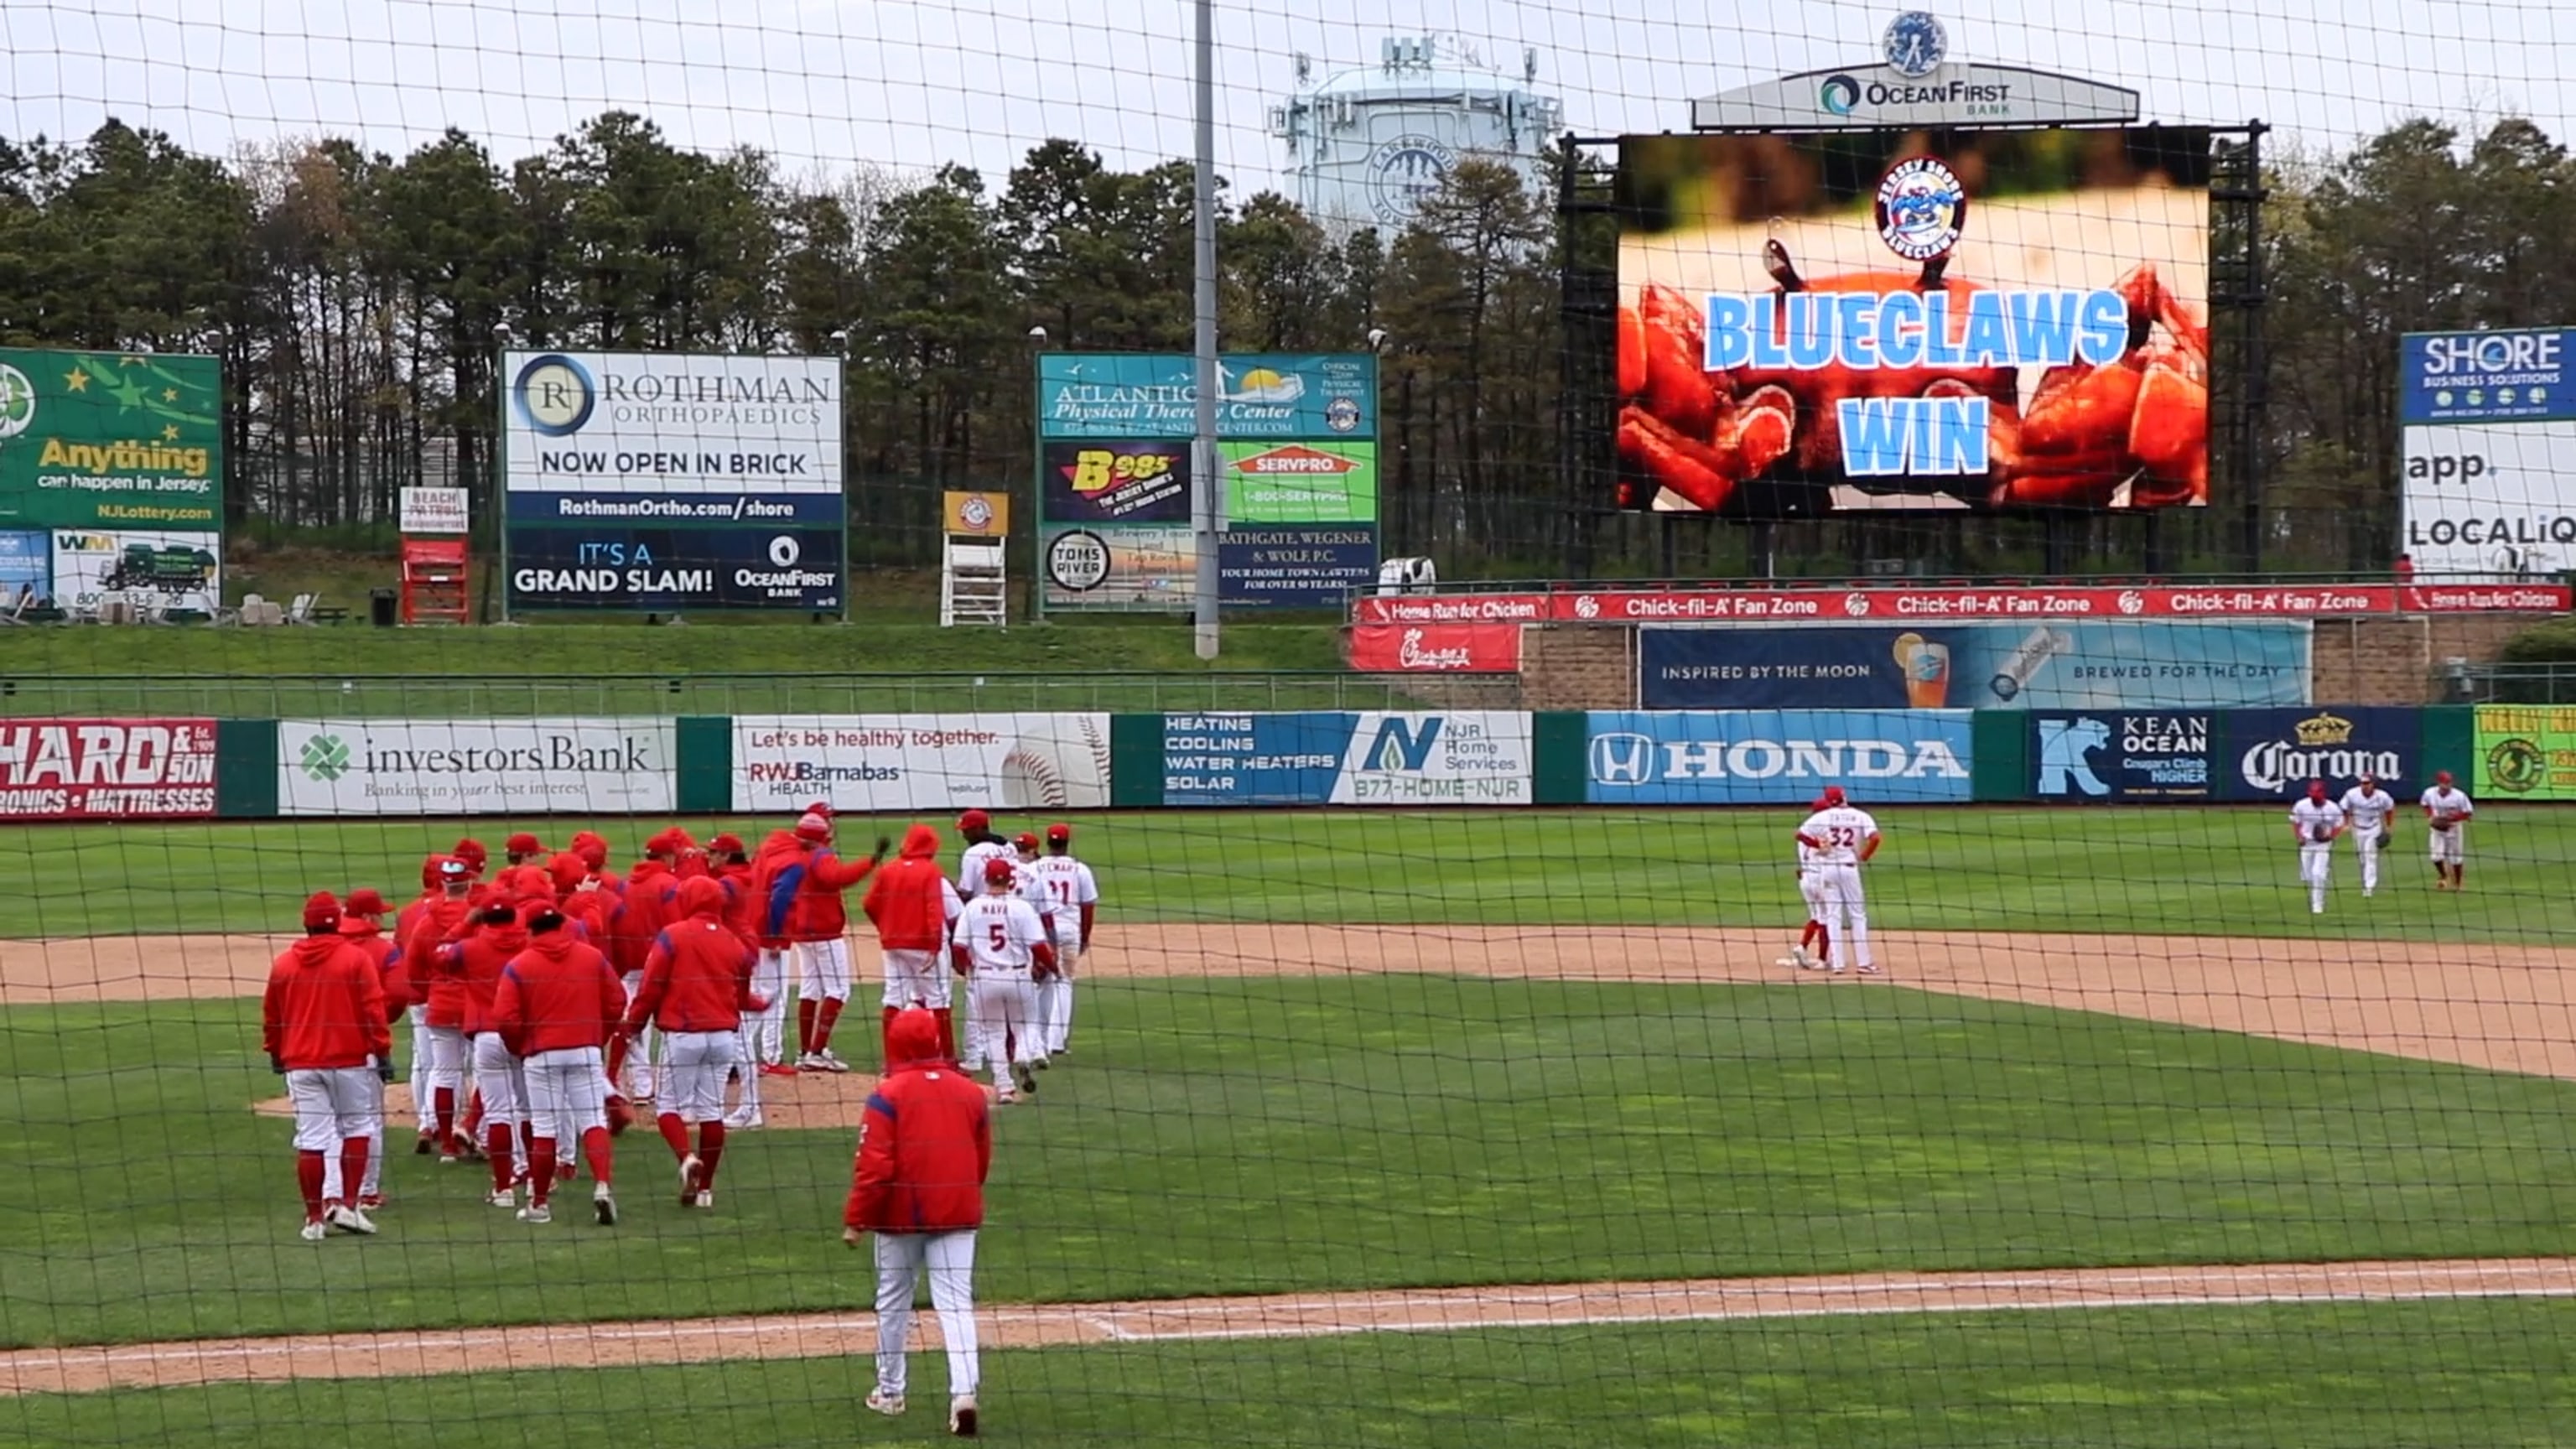 BlueClaws Set for Amazing Summer, 05/17/2022